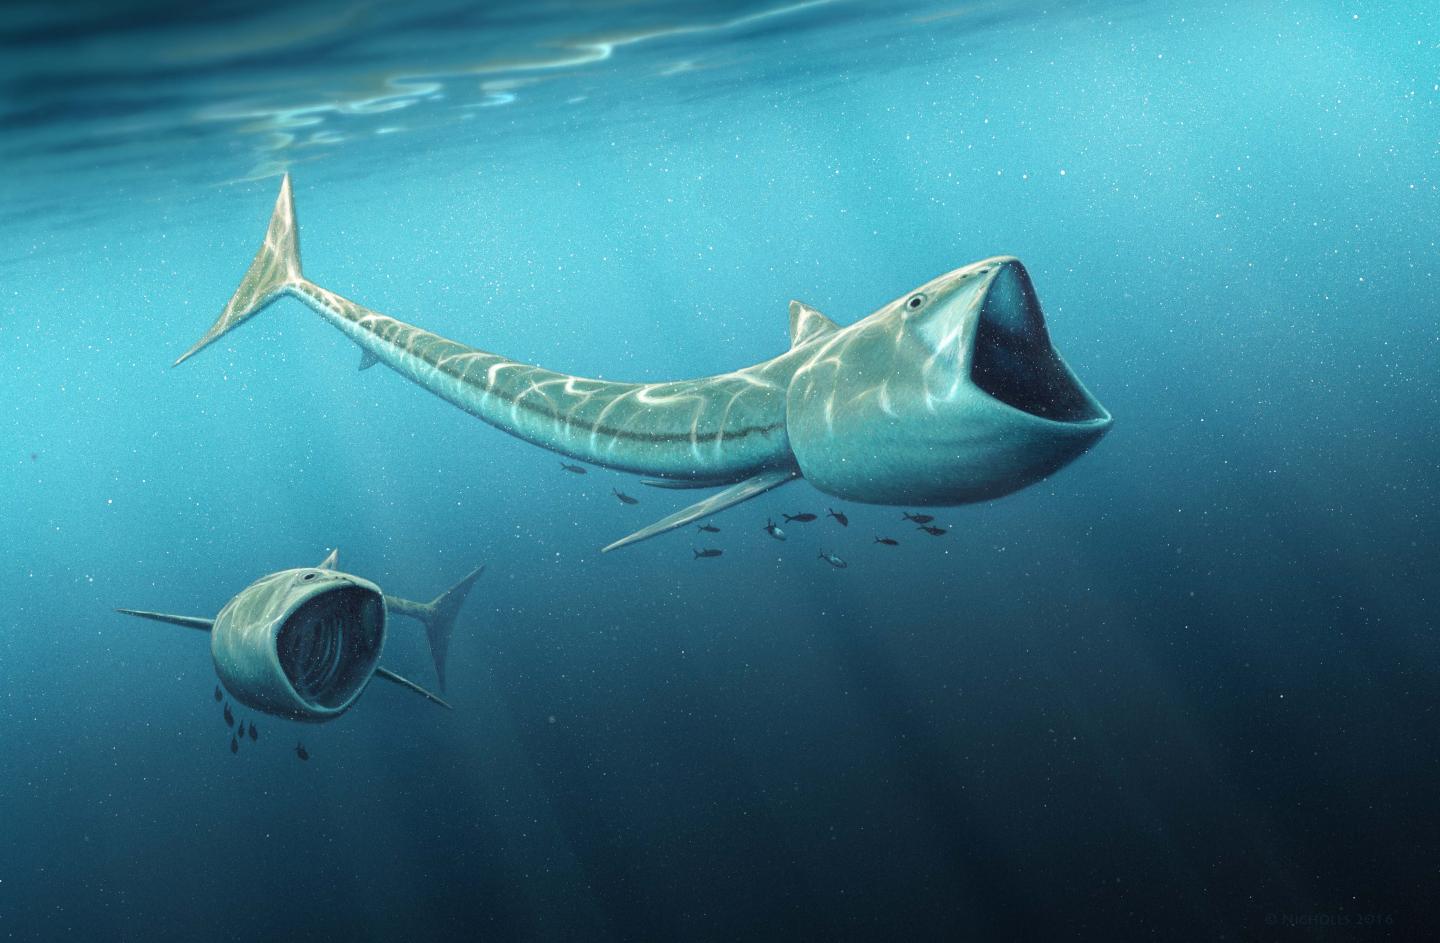 Drawing of Two New Plankton-Eating Fossil Fish Species, of the Genus Called <i>Rhinconichthys</i>